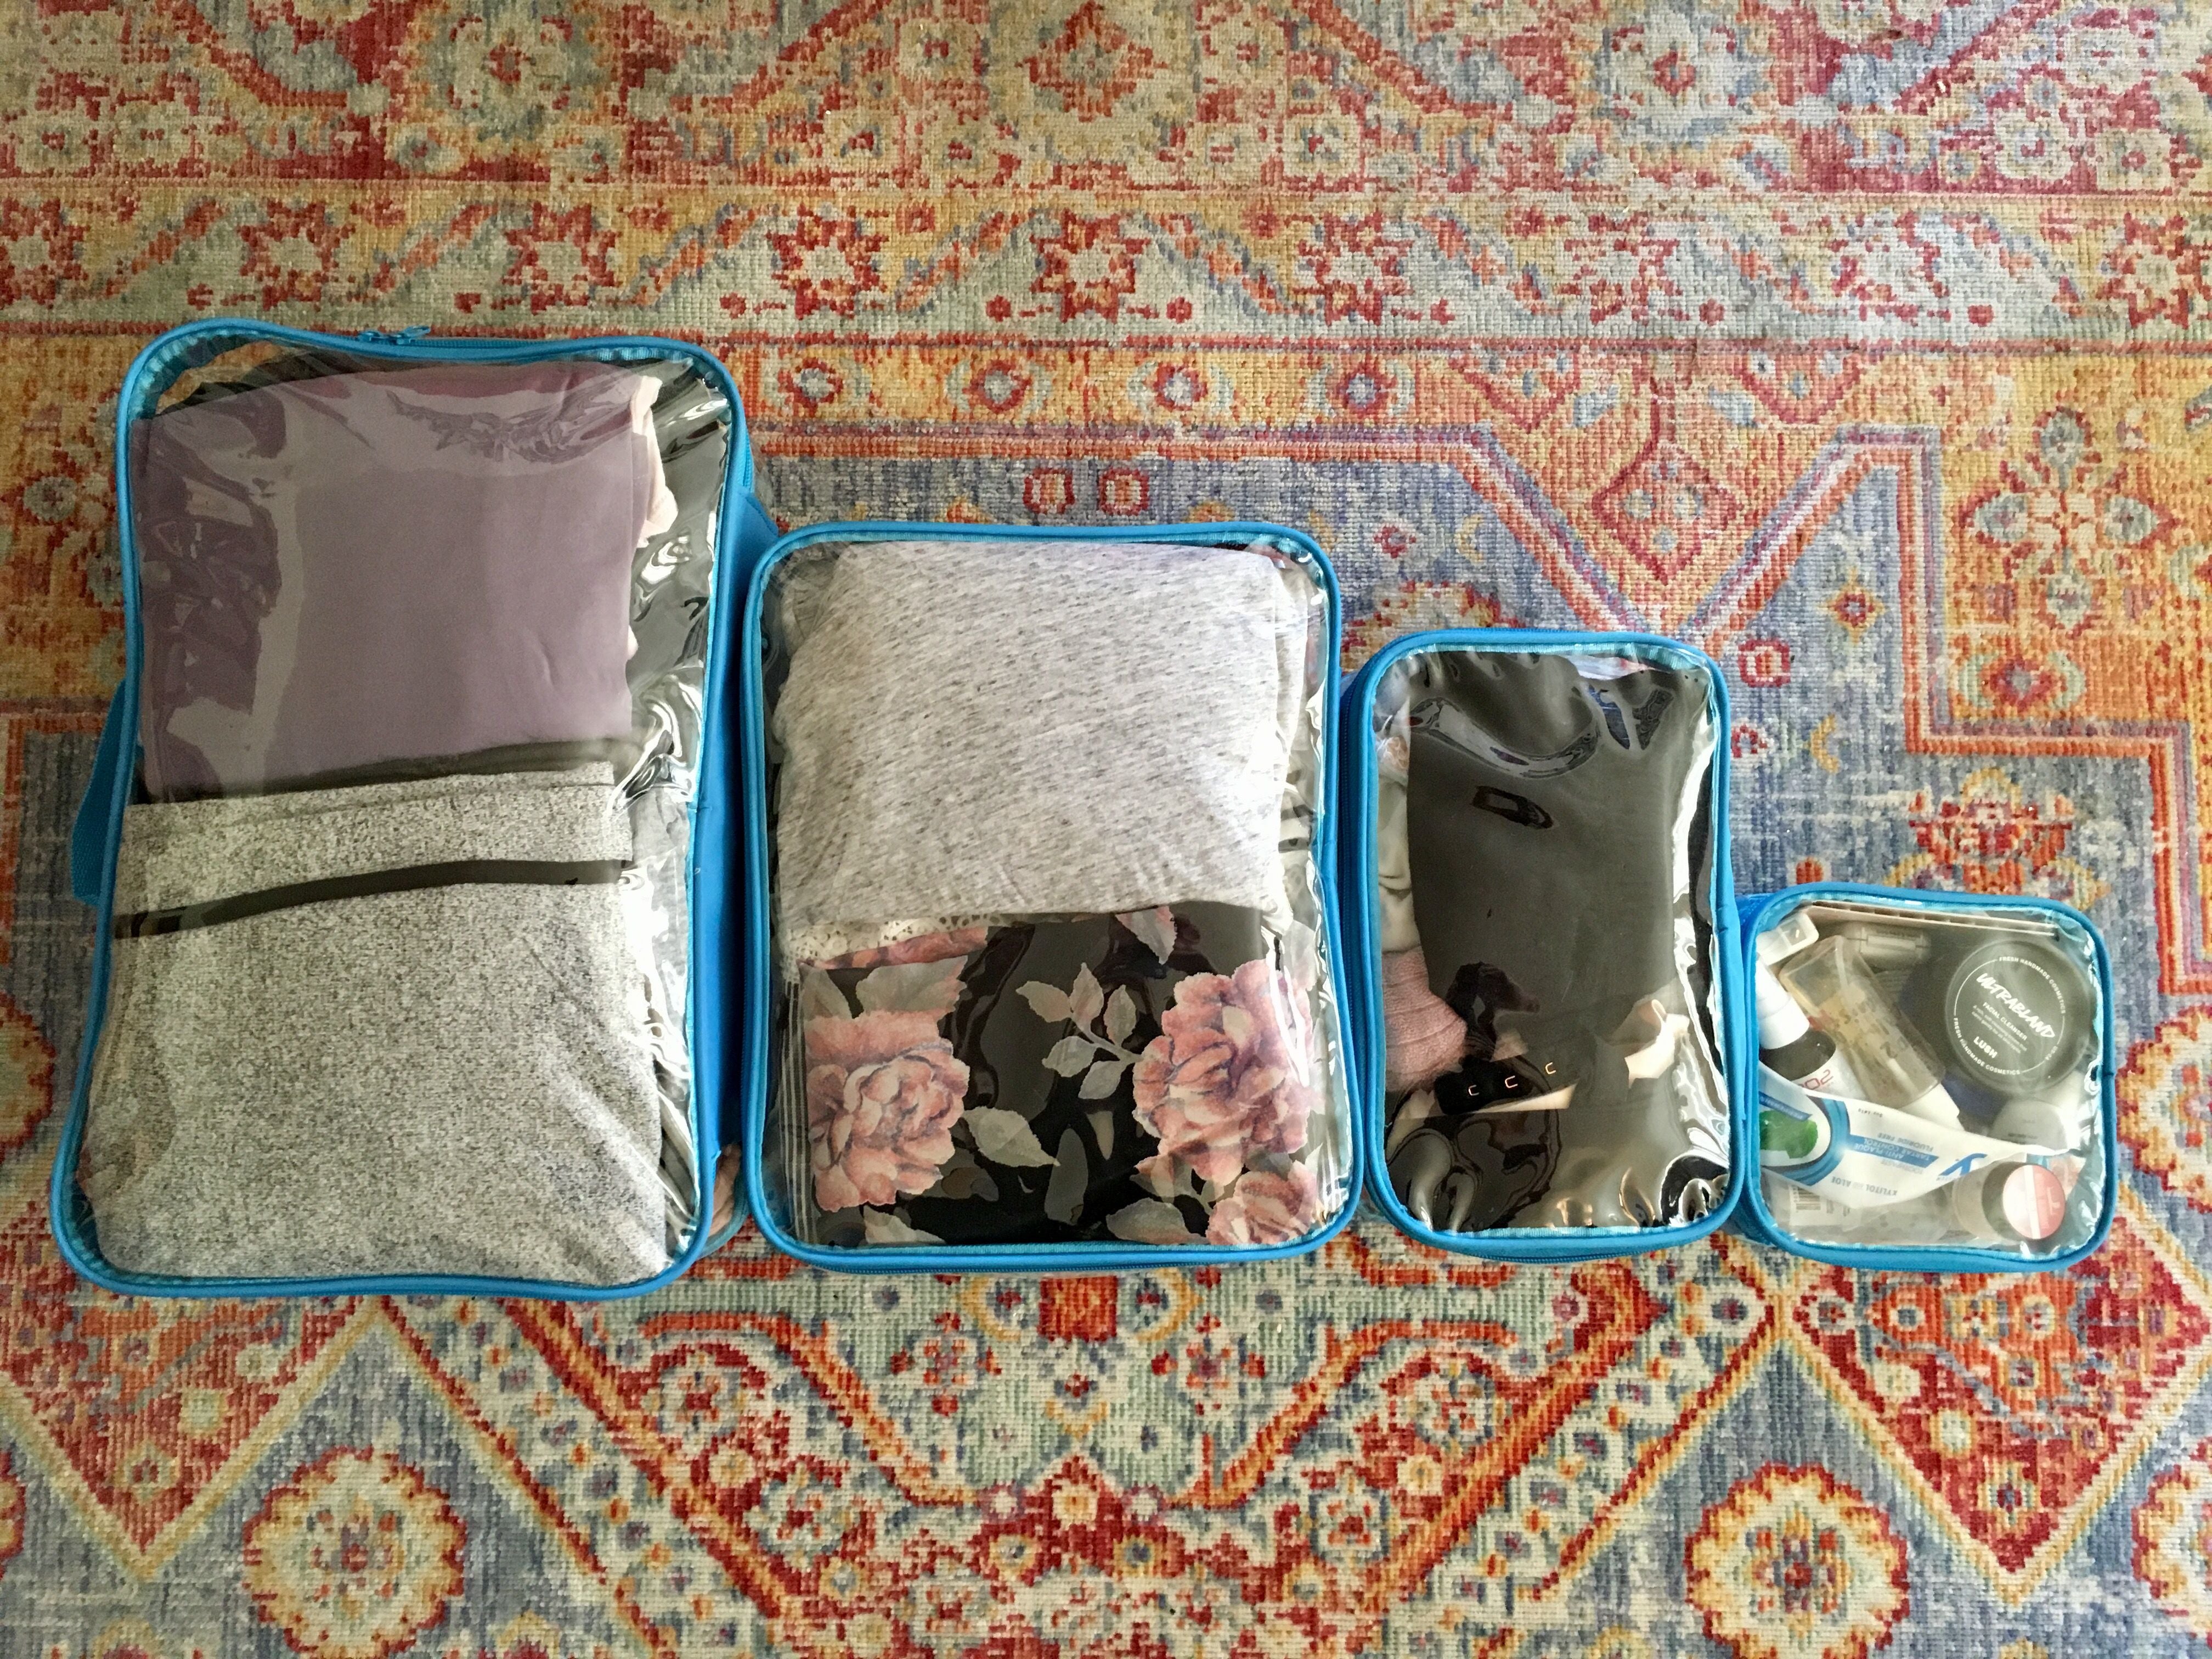 Travel items organized using packing cubes